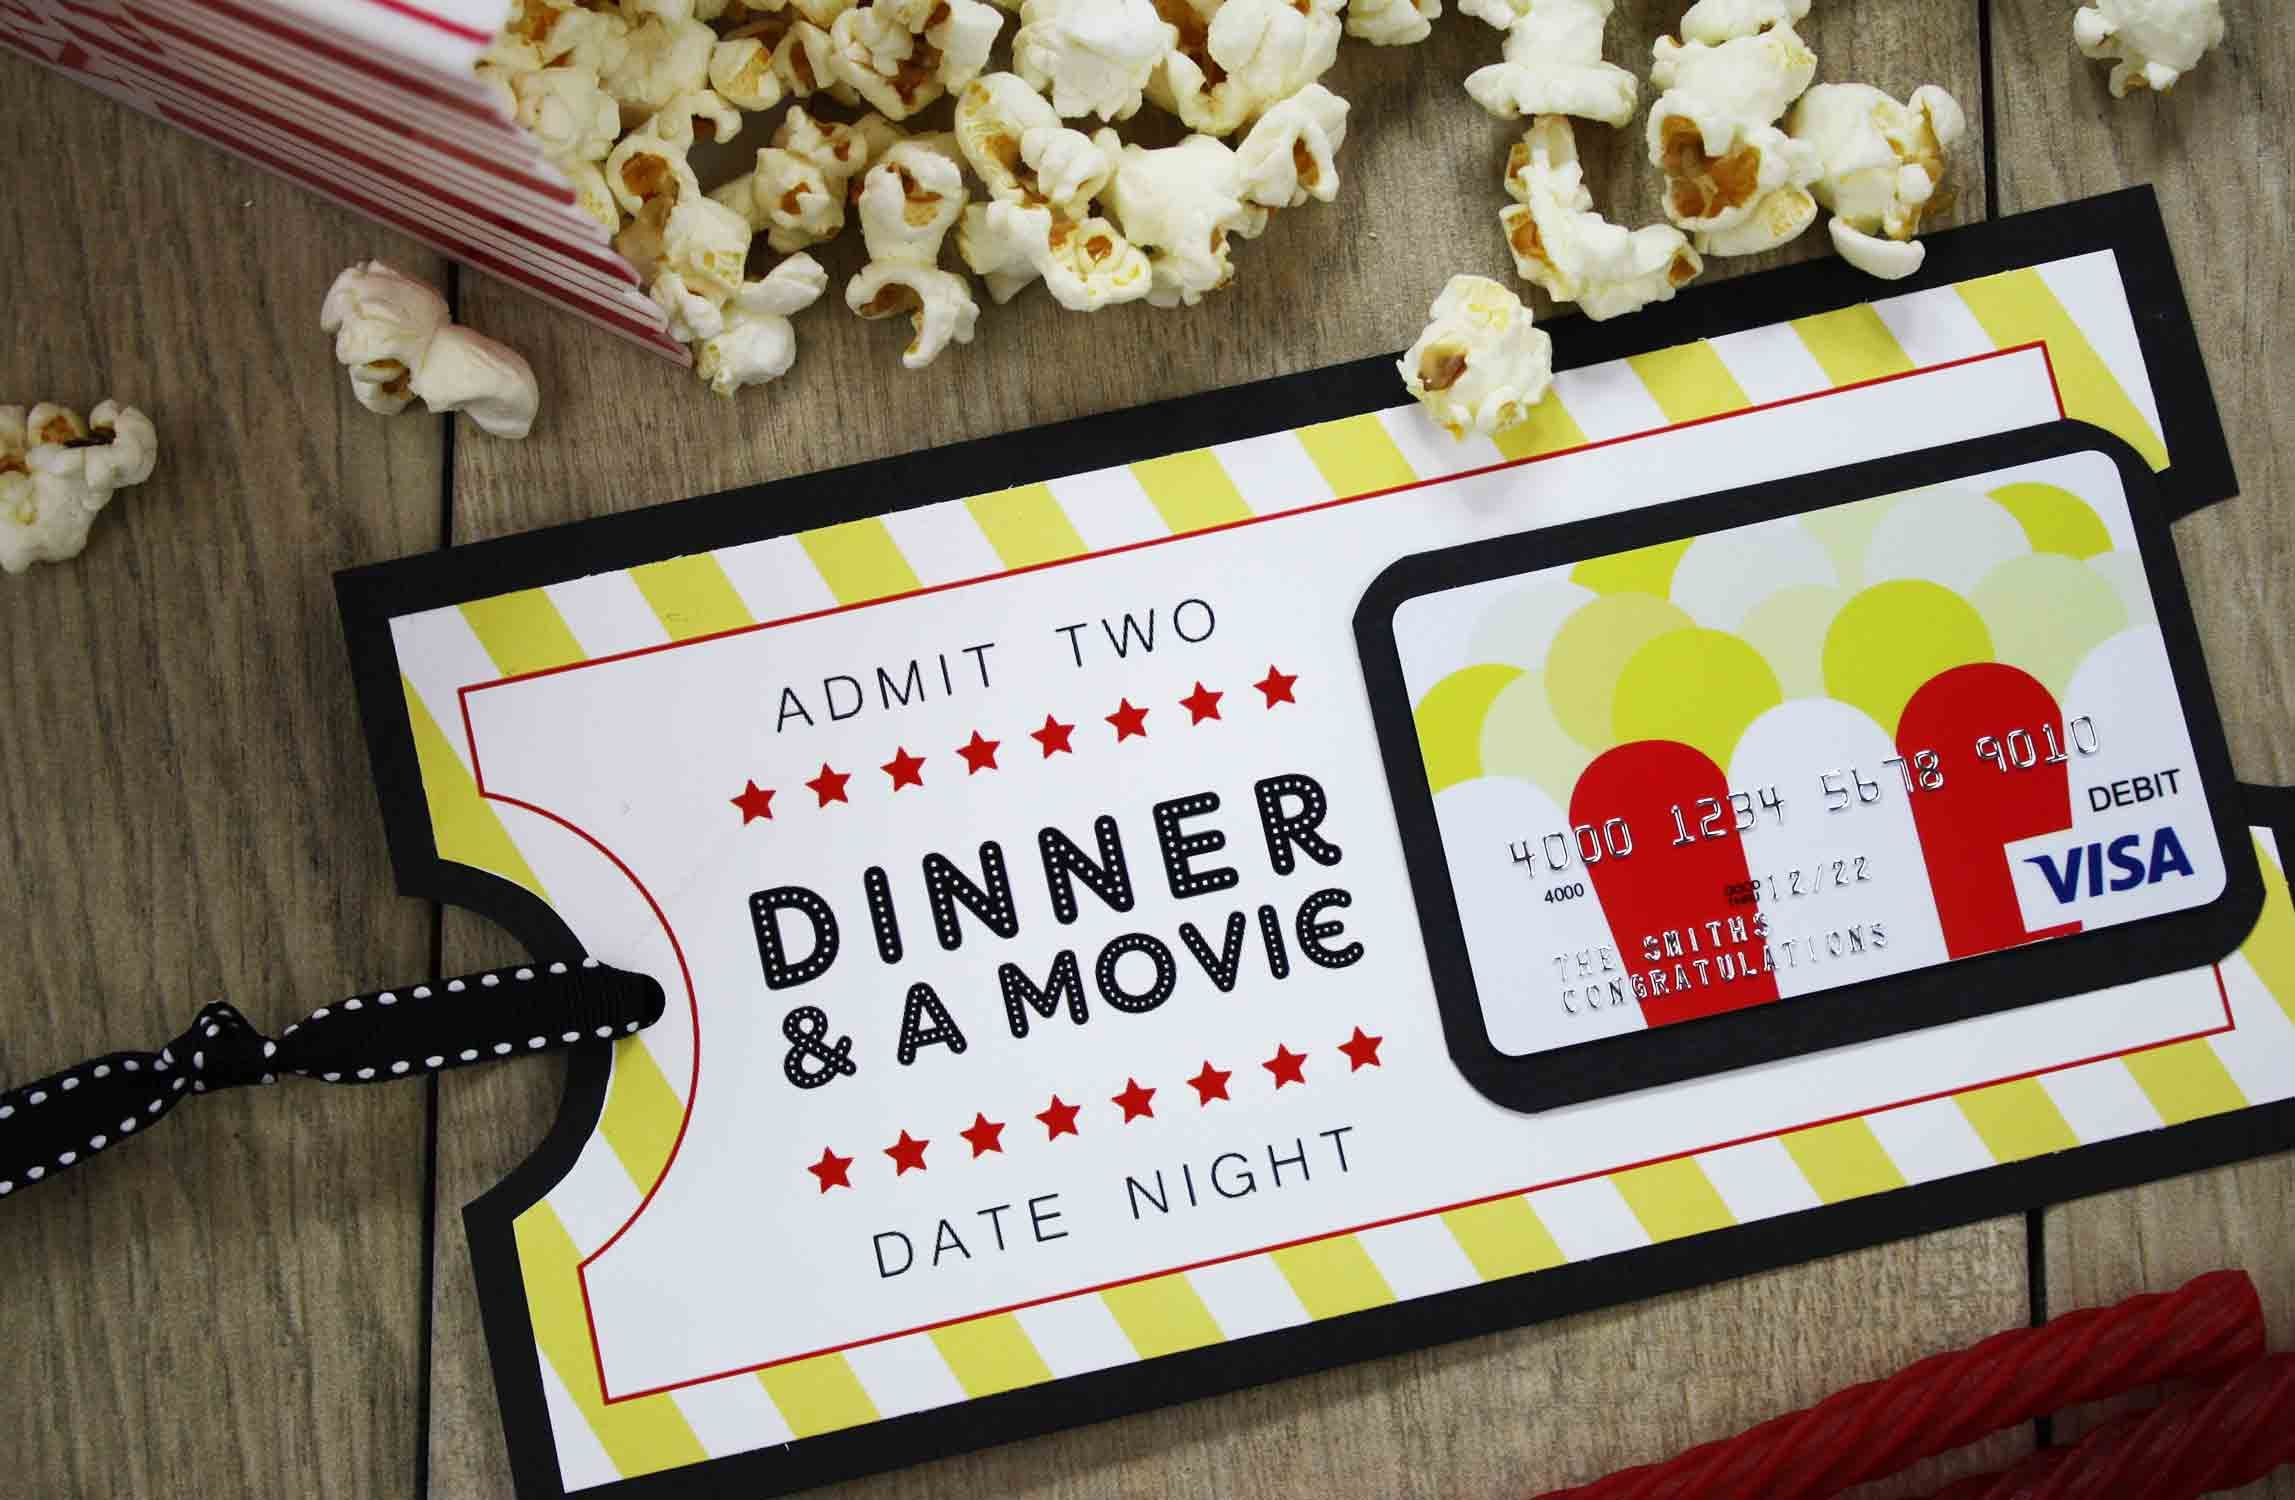 Dinner And A Movie Gift Basket Ideas
 Free Printable Give DATE NIGHT for a Wedding Gift